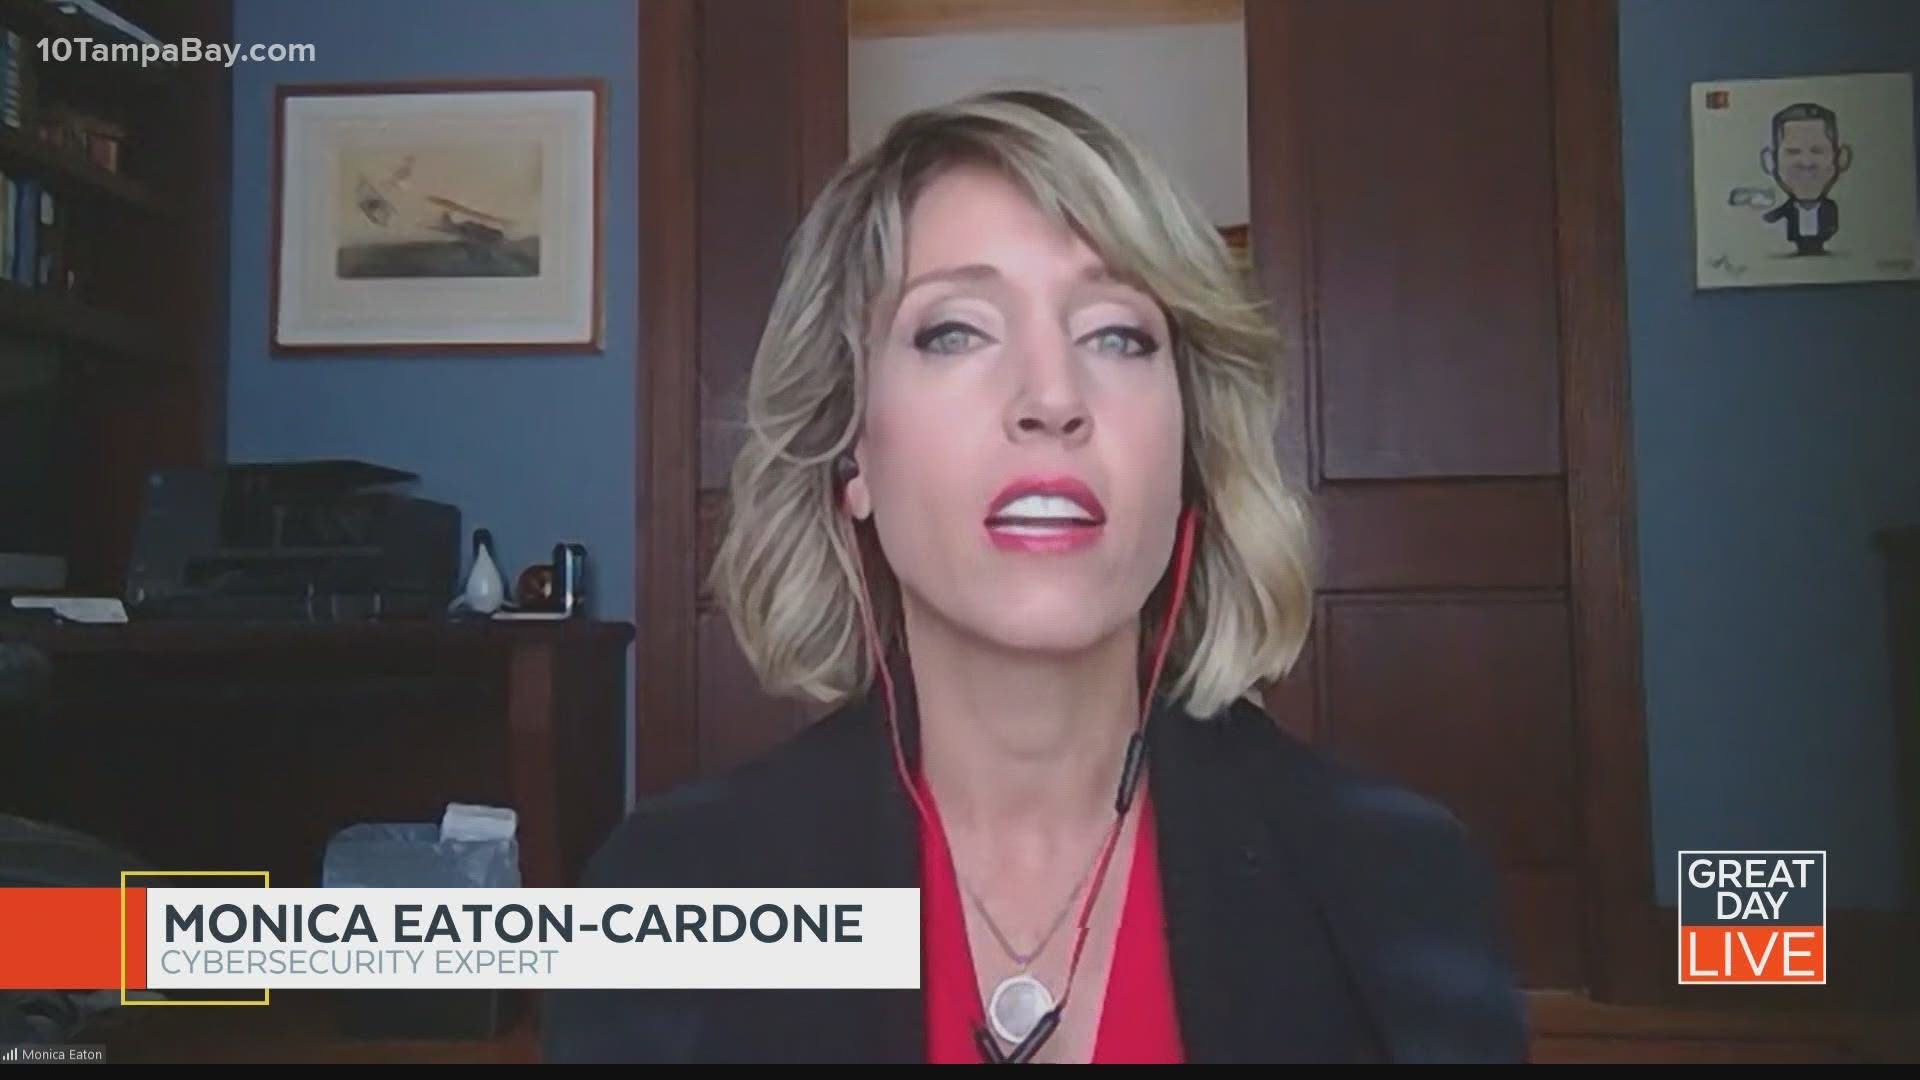 Monica Eaton-Cardone is the  COO & co-founder of Chargebacks911. She joined GDL to warn viewers about a number of coronavirus related scams and schemes.